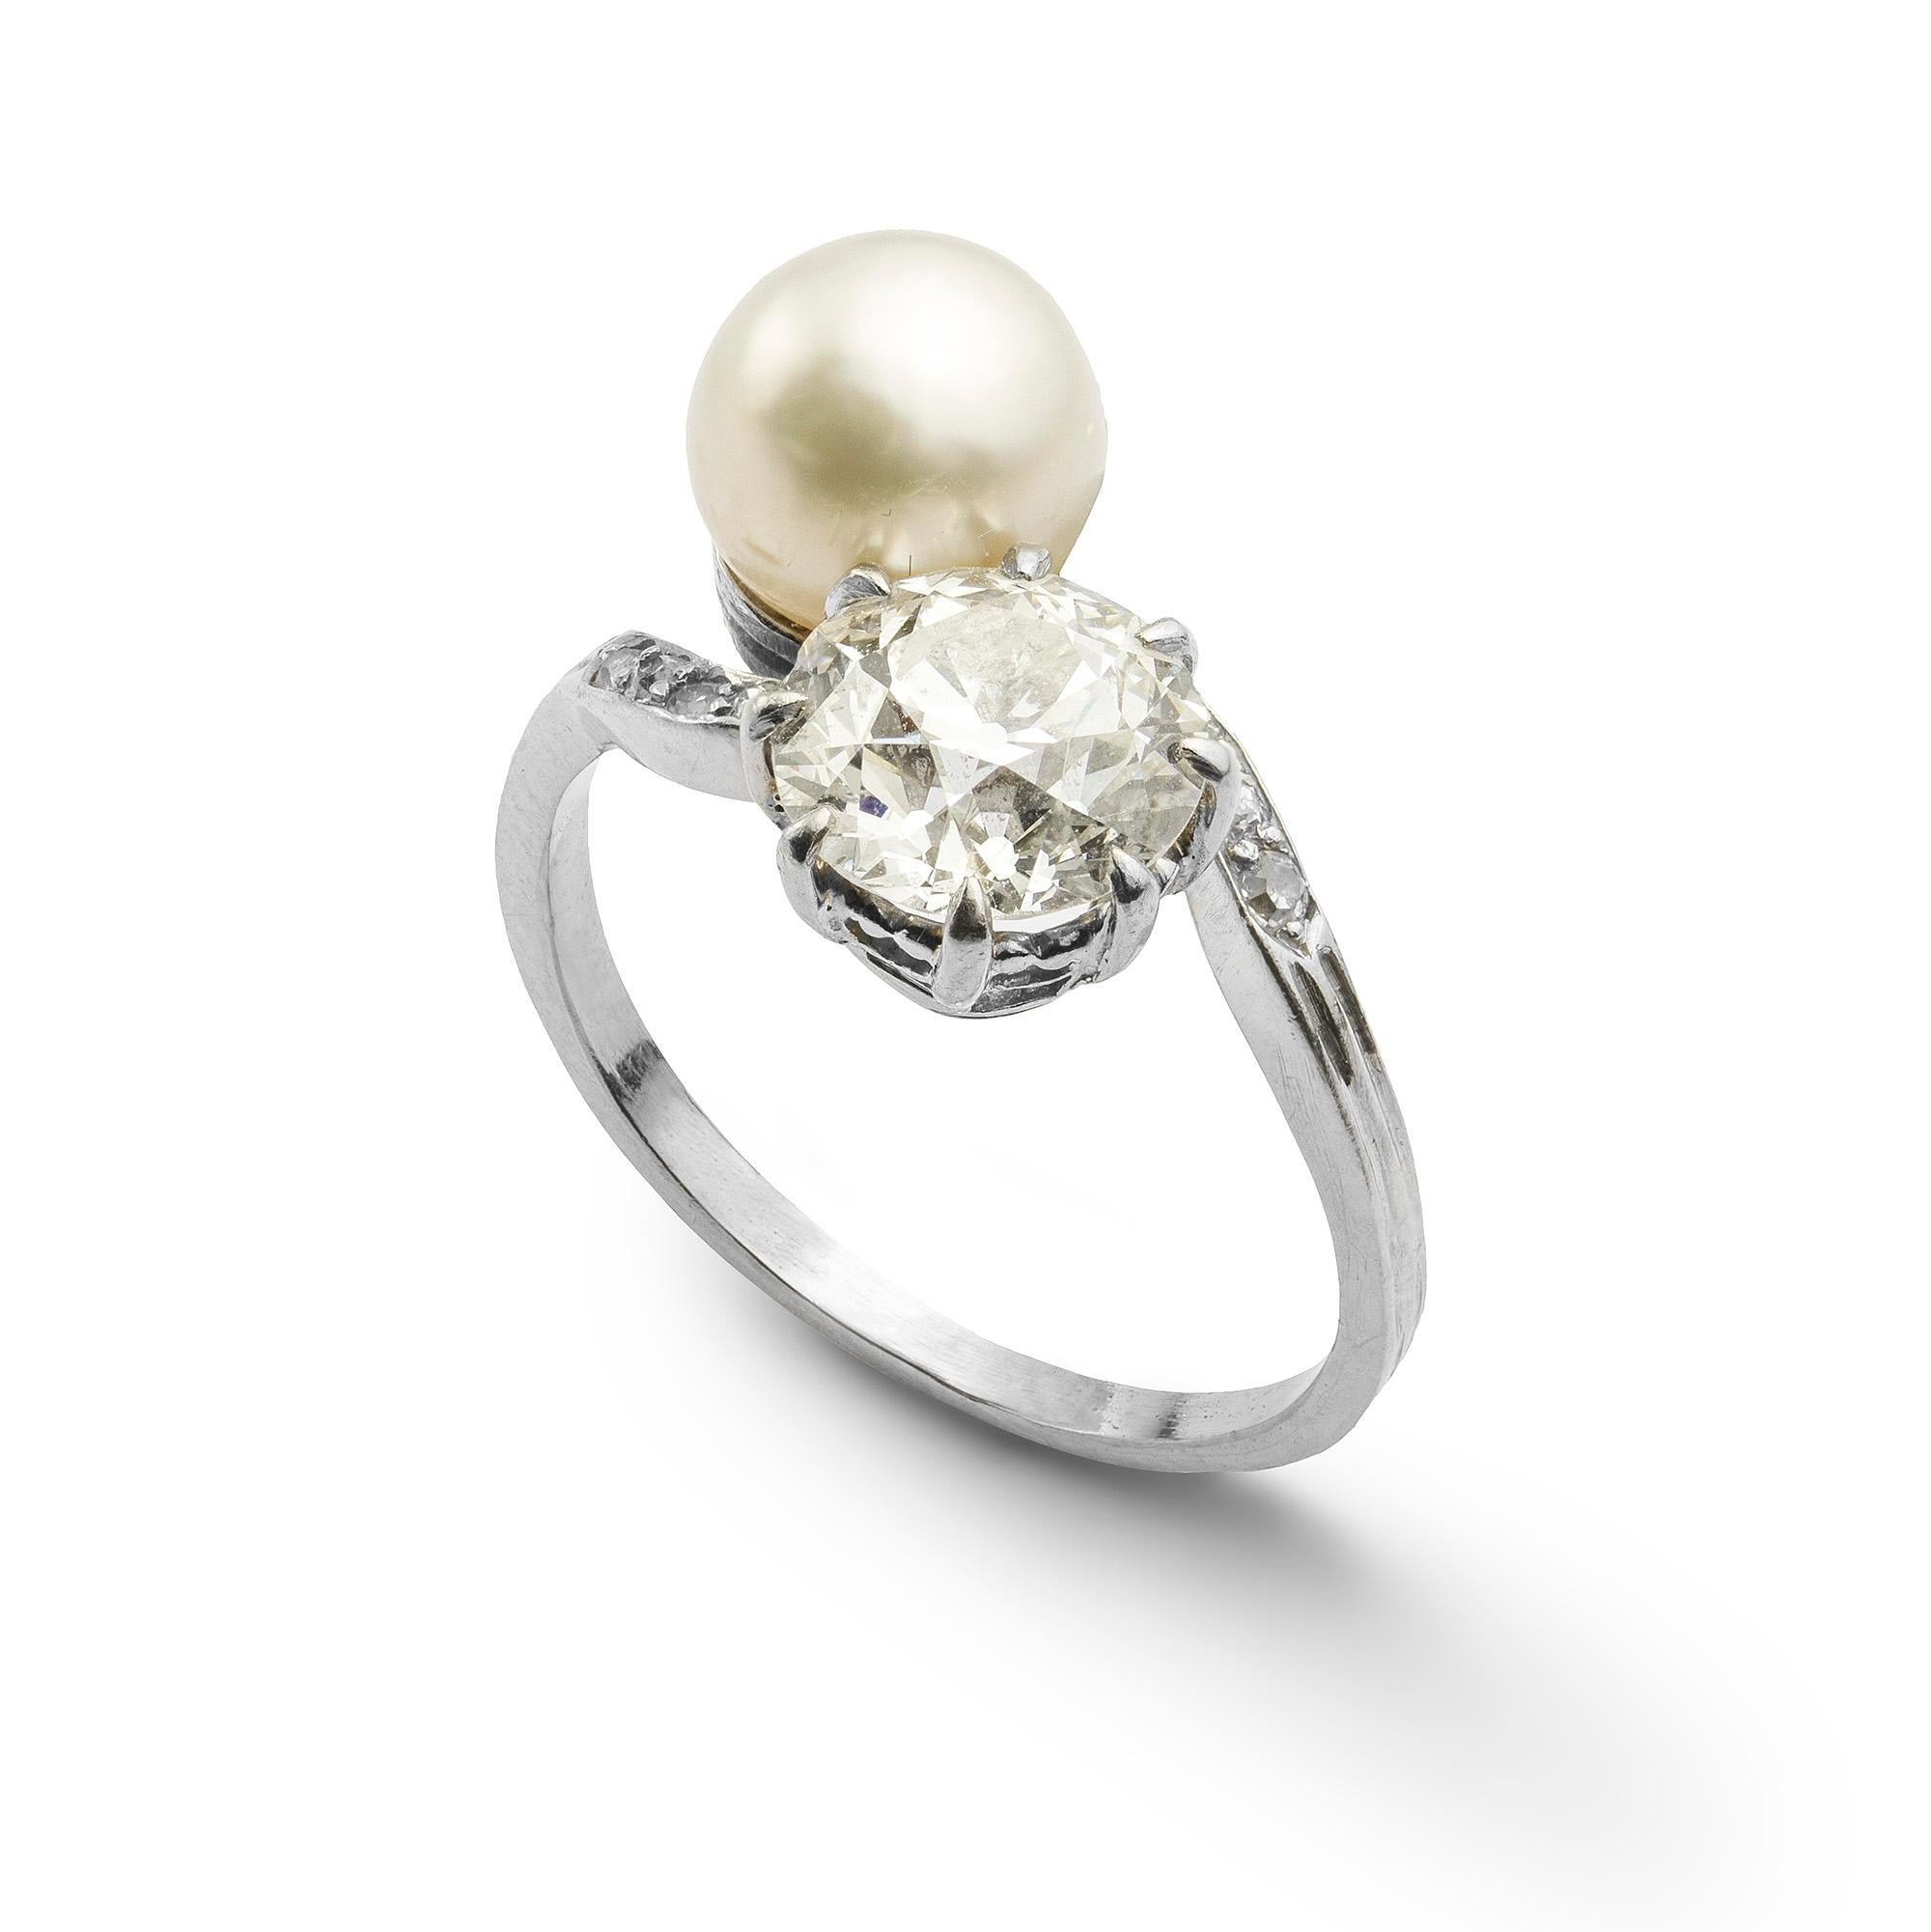 A natural pearl and diamond cross-over ring, the pearl accompanied by GCS Report stating to natural of saltwater origin, set in cross over style with an old brilliant-cut diamond weighing 1.69 carats, accompanied by GCS Report stating to be of J